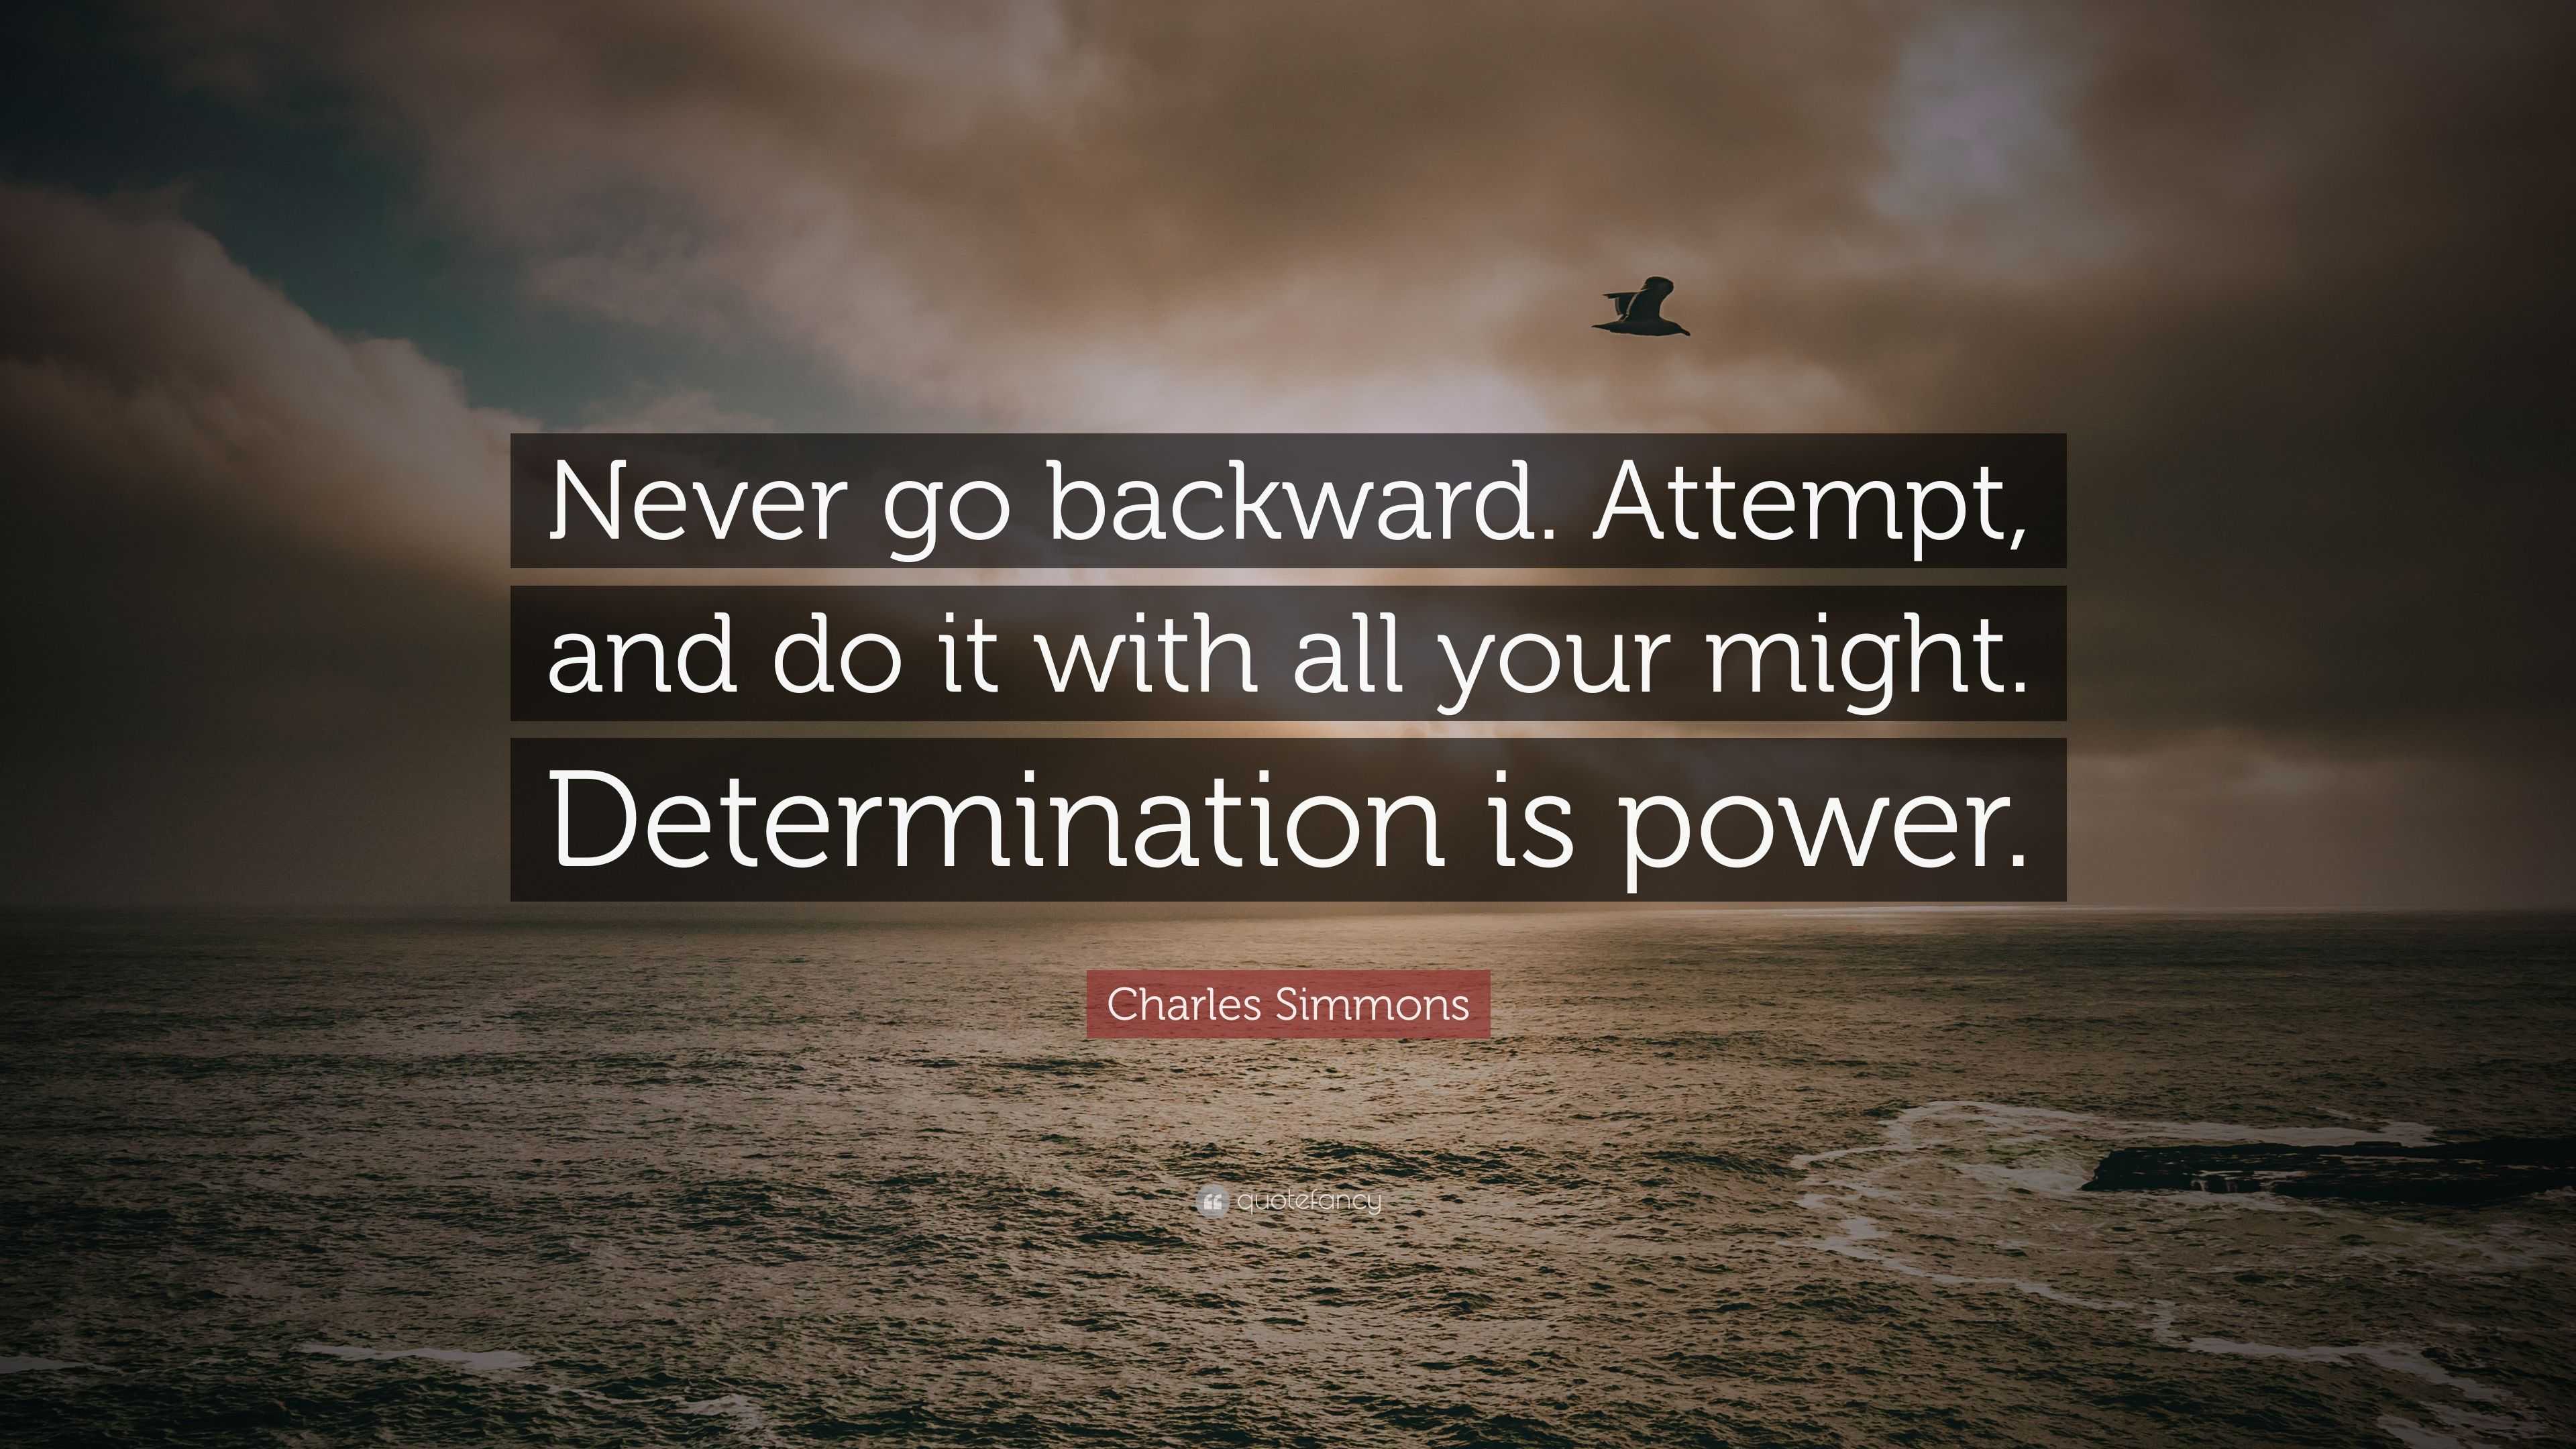 Charles Simmons Quote: “Never go backward. Attempt, and do it with all ...